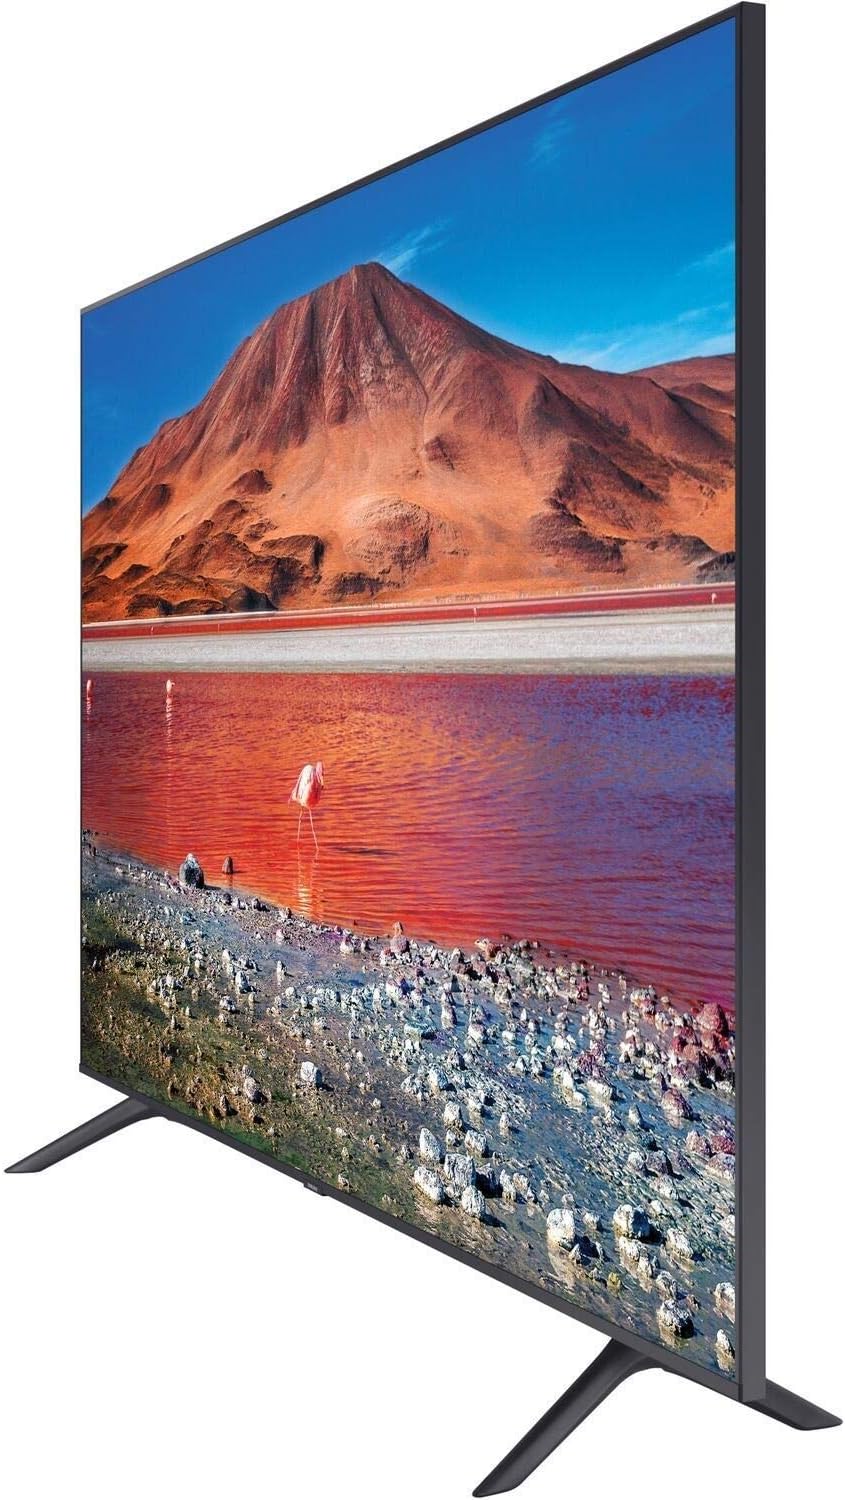 Samsung 50" TU7100 HDR Smart 4K TV with Tizen OS - Amazing Gadgets Outlet